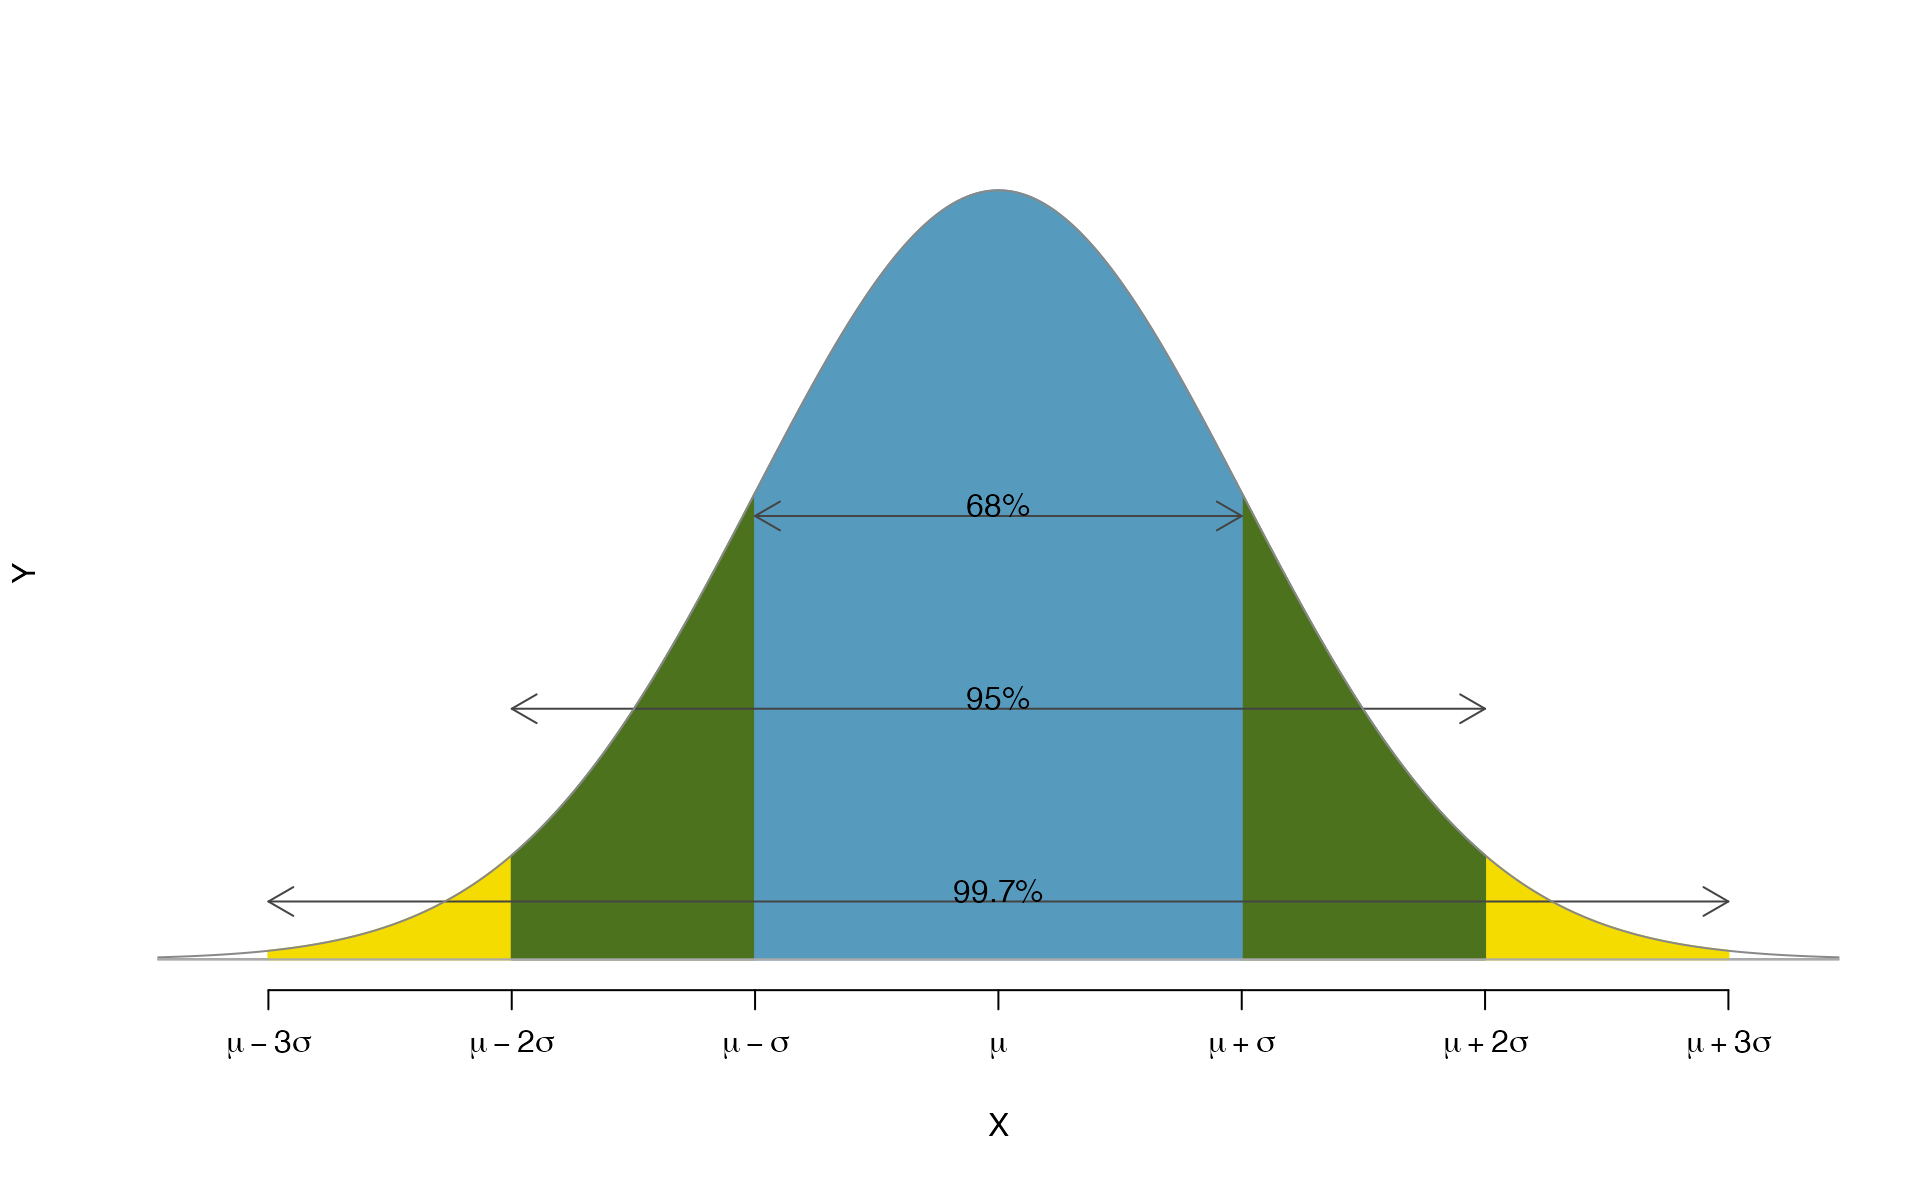 Probabilities for falling within 1, 2, and 3 standard deviations of the mean in a normal distribution.